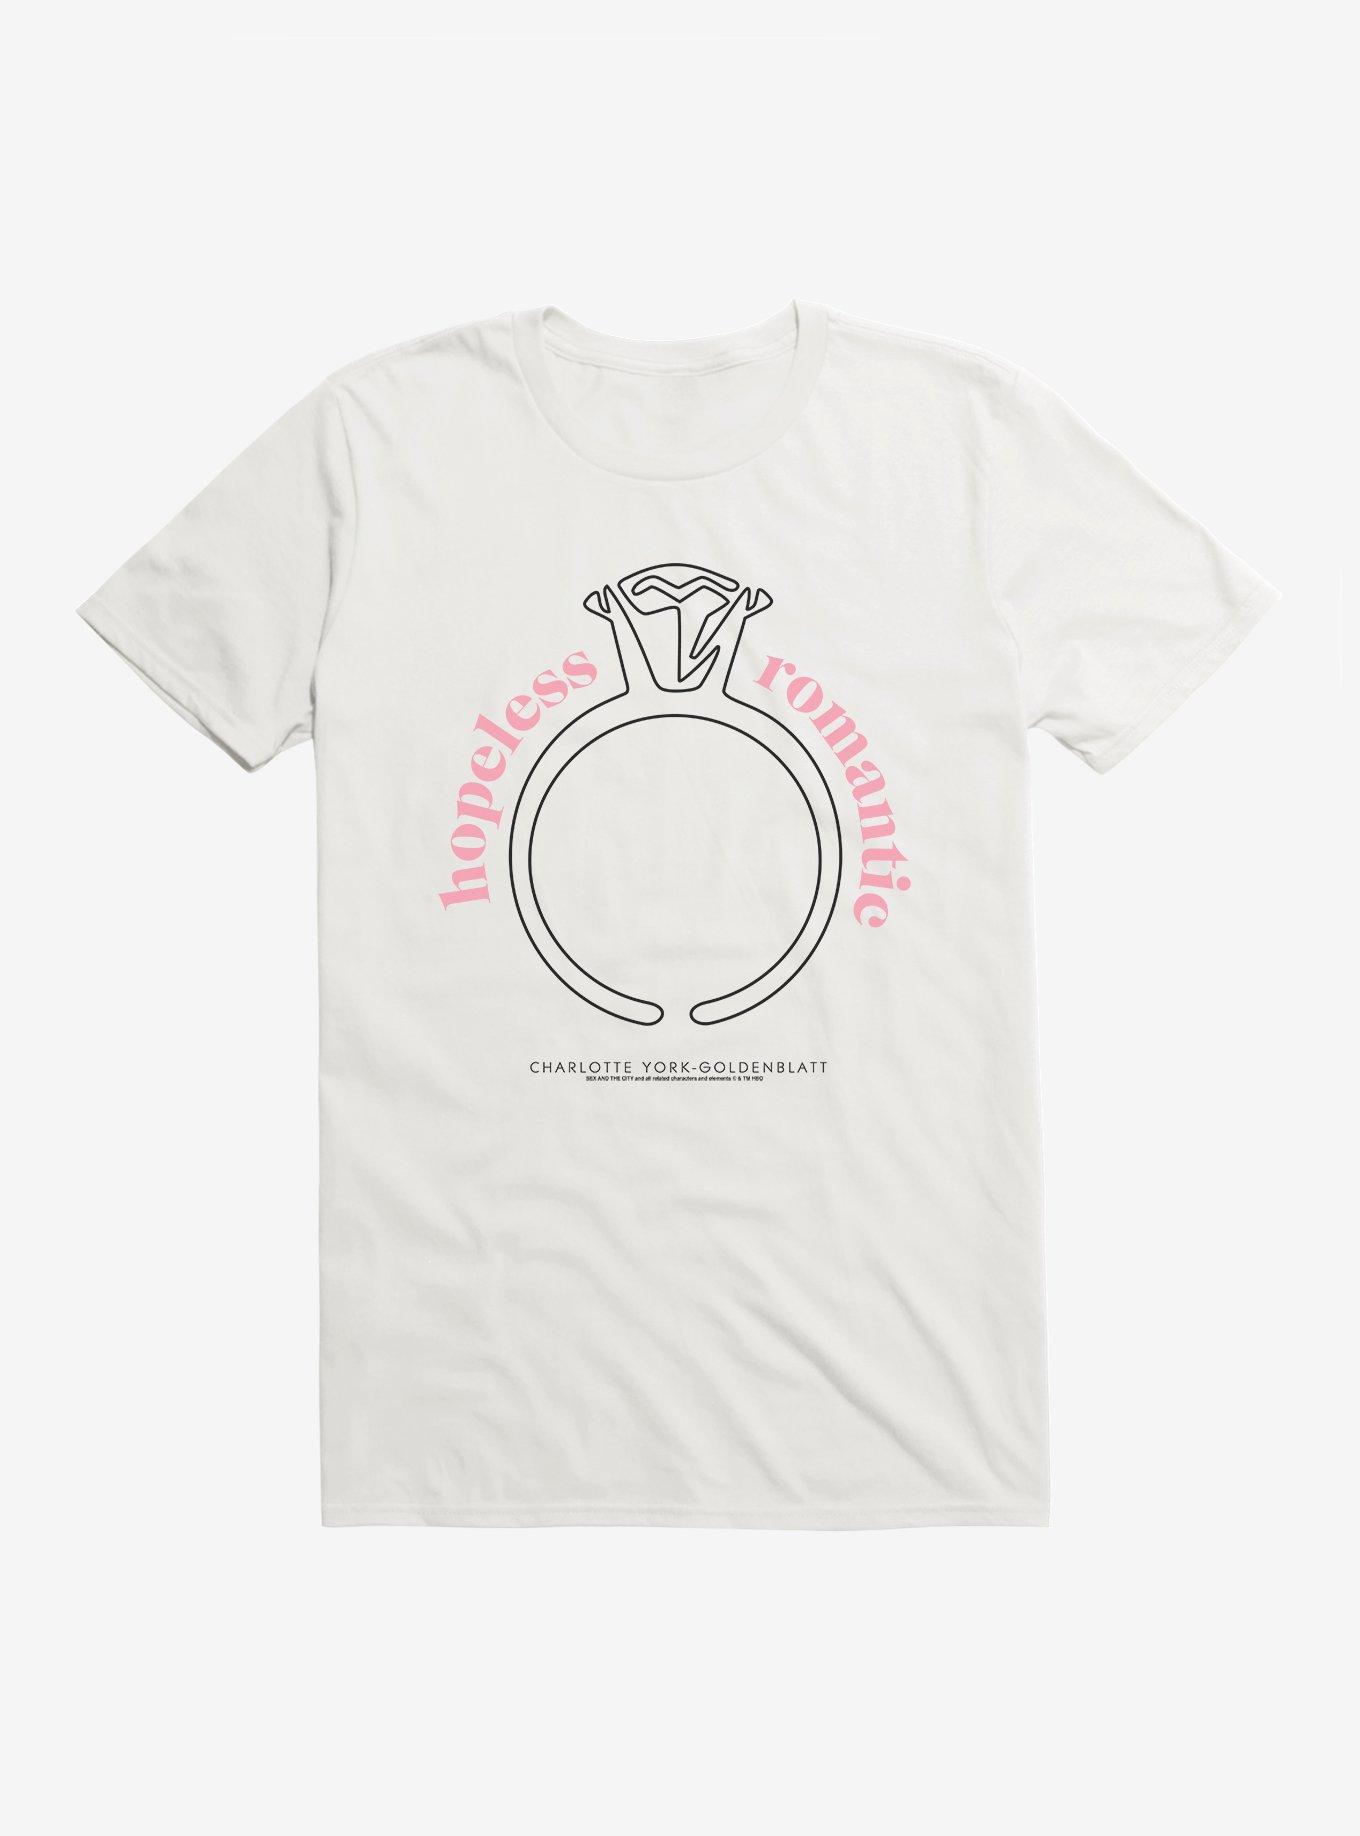 Sex And The City Hopeless Romantic T-Shirt